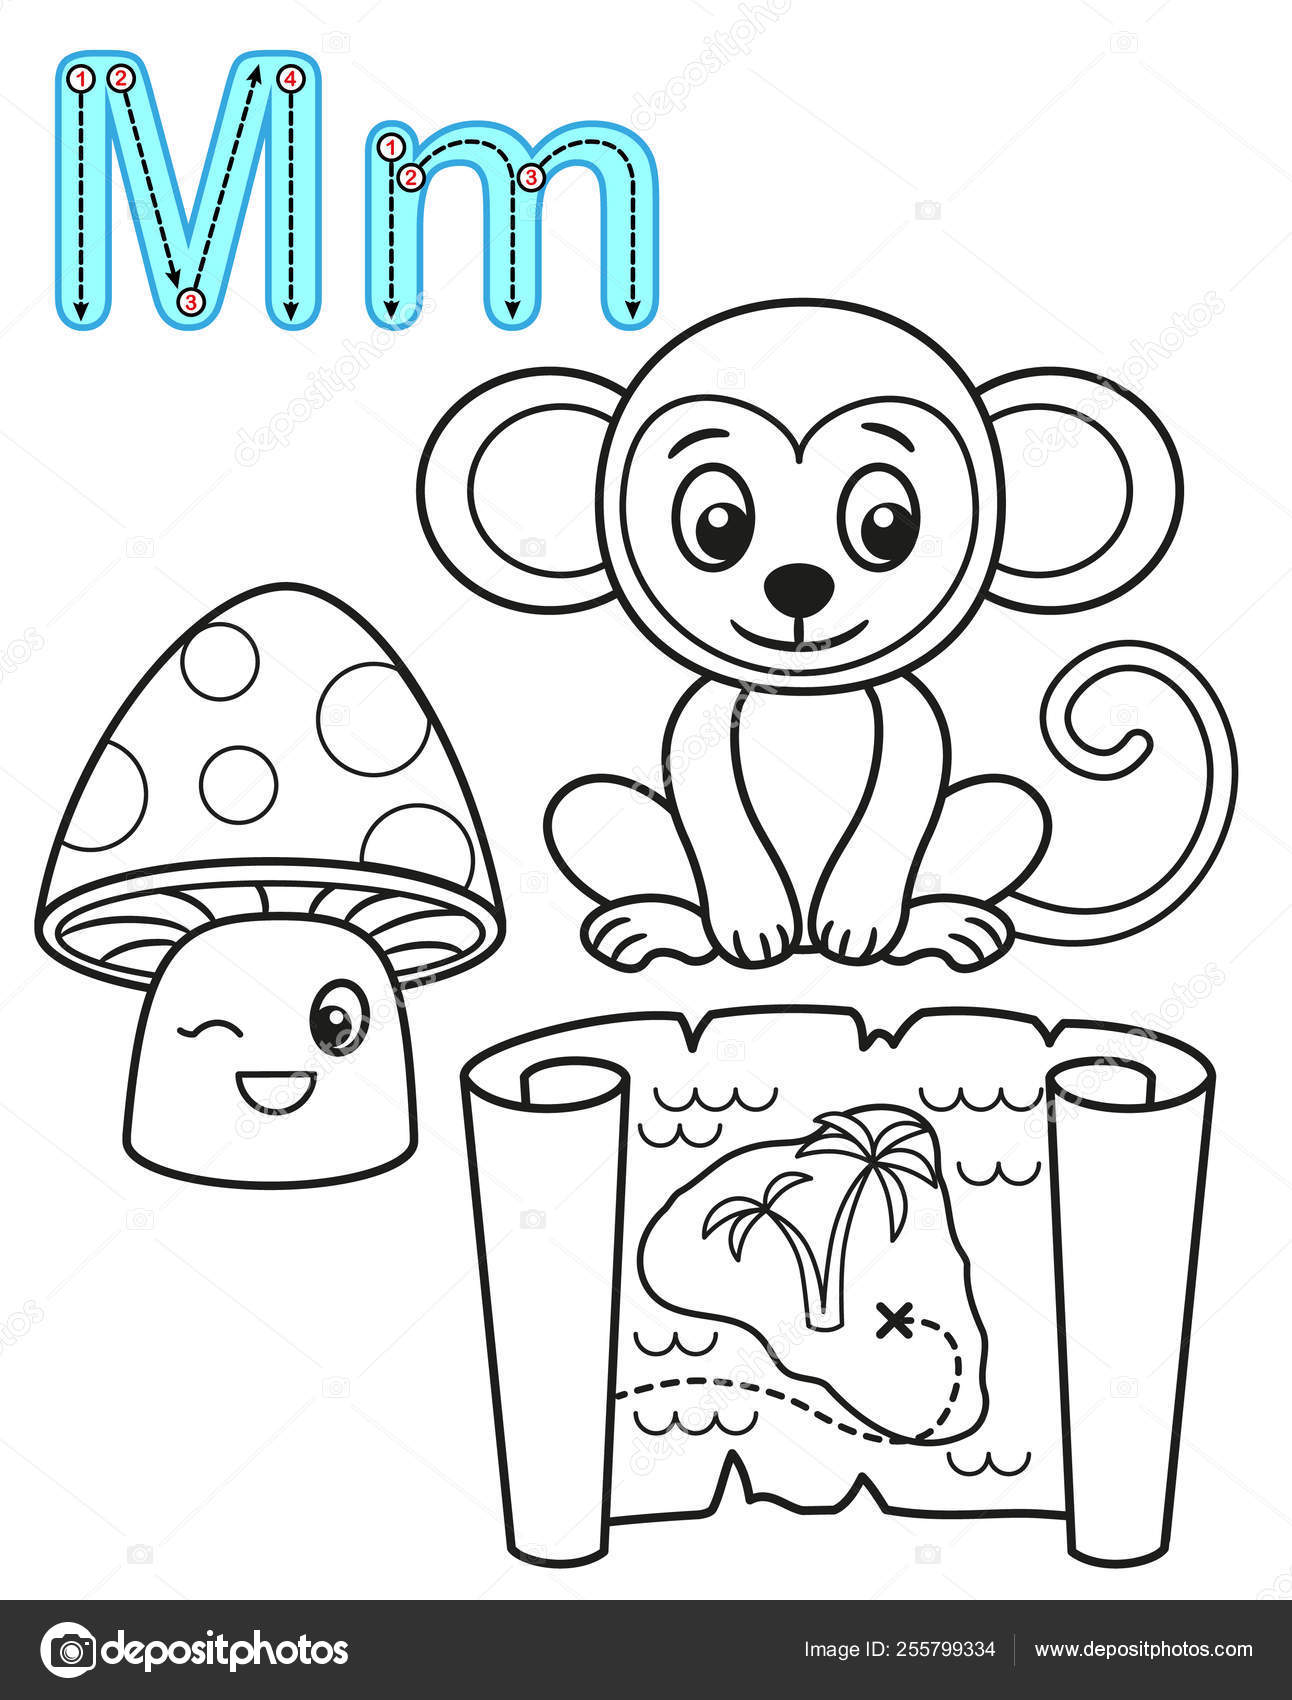 Printable coloring page for kindergarten and preschool card for study english vector coloring book alphabet letter m mushroom map monkey stock vector by natasha